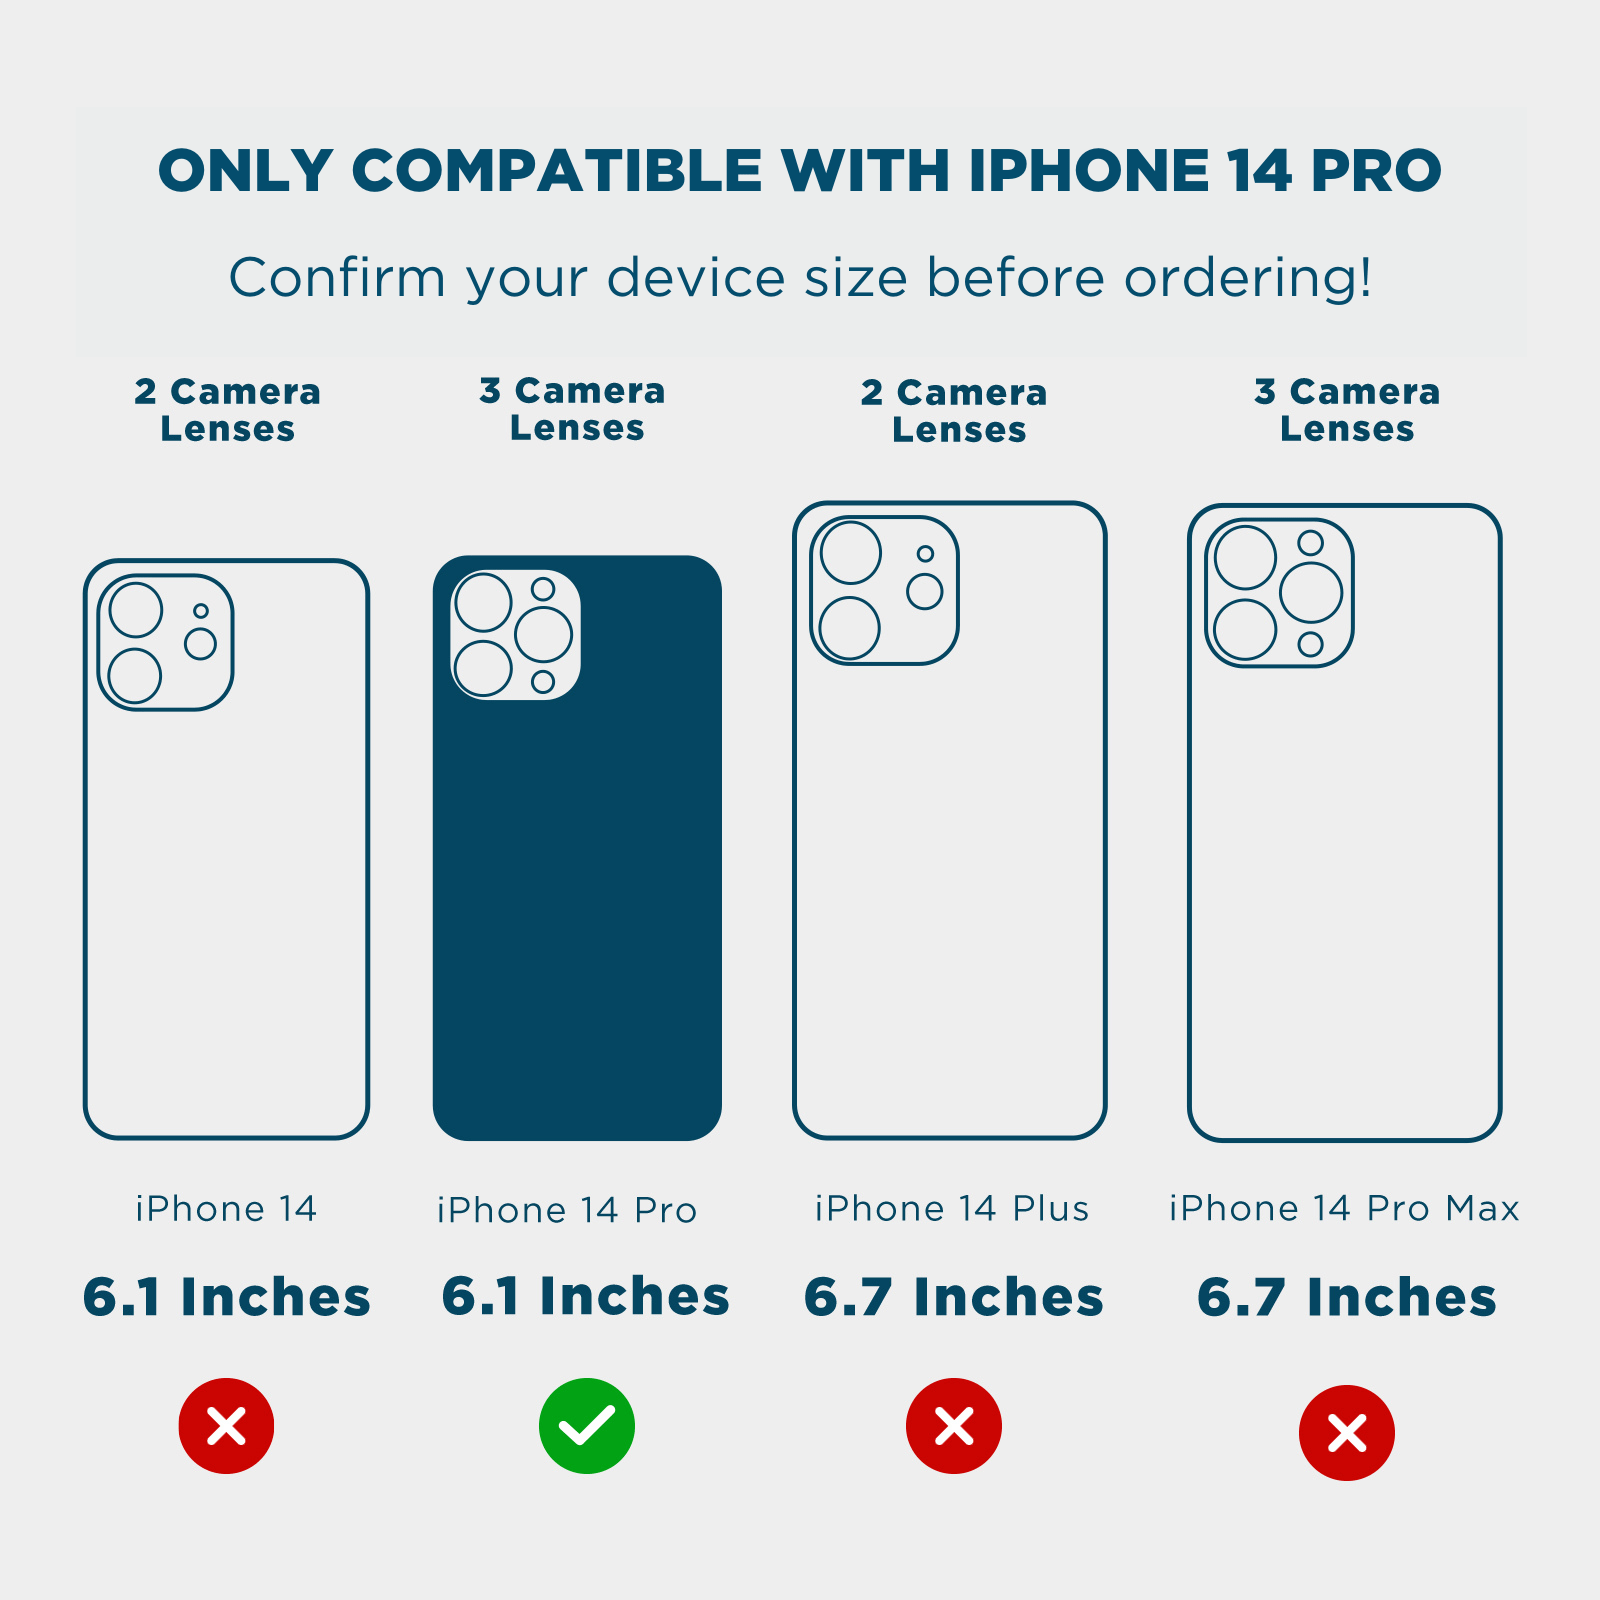 ONLY COMPATIBLE WITH IPHONE 14 PRO. CONFIRM YOUR DEVICE SIZE BEFORE ORDERING. 2 CAMERA LENSES, 3 CAMERA LENSES, 2 CAMERA LENSES, 3 CAMERA LENSES, 6.1, 6.1, 6.7, 6.7. COLOR::HOLOGRAPHIC